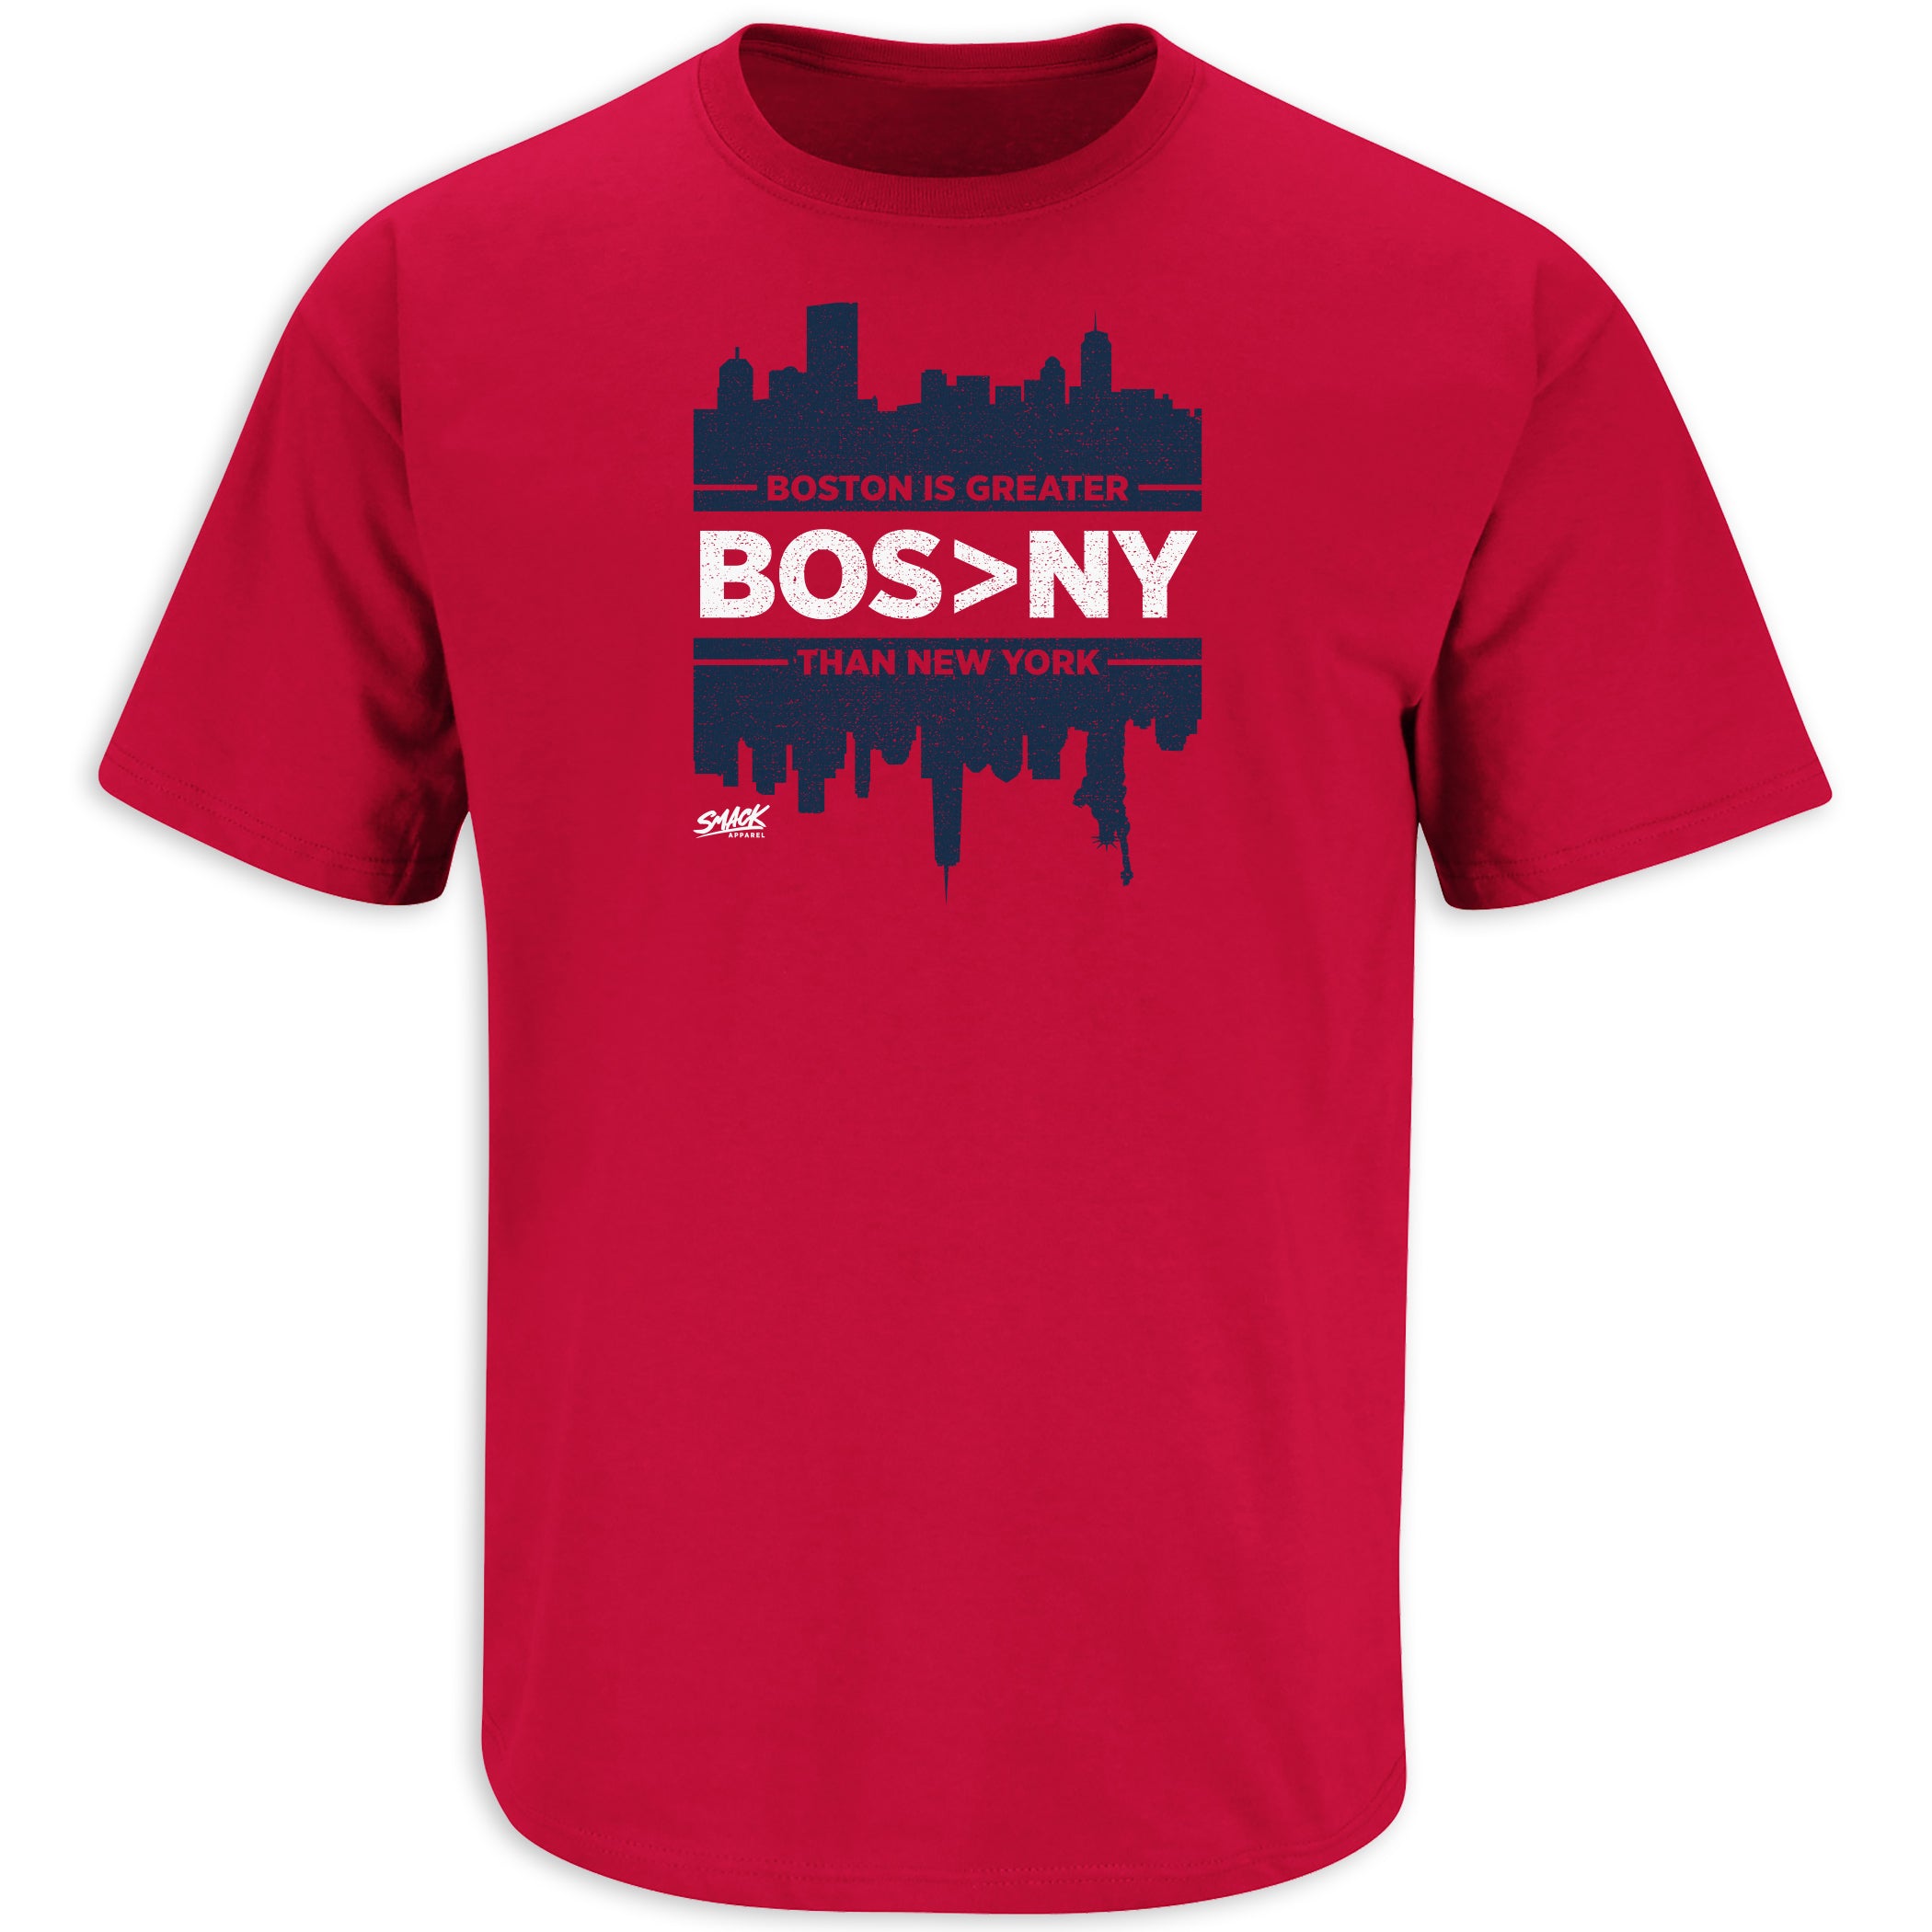 Smack Apparel Boston Is Greater Than New York (BOS>NY) T-Shirt for Boston Baseball Fans, Short Sleeve / 4XL / Red